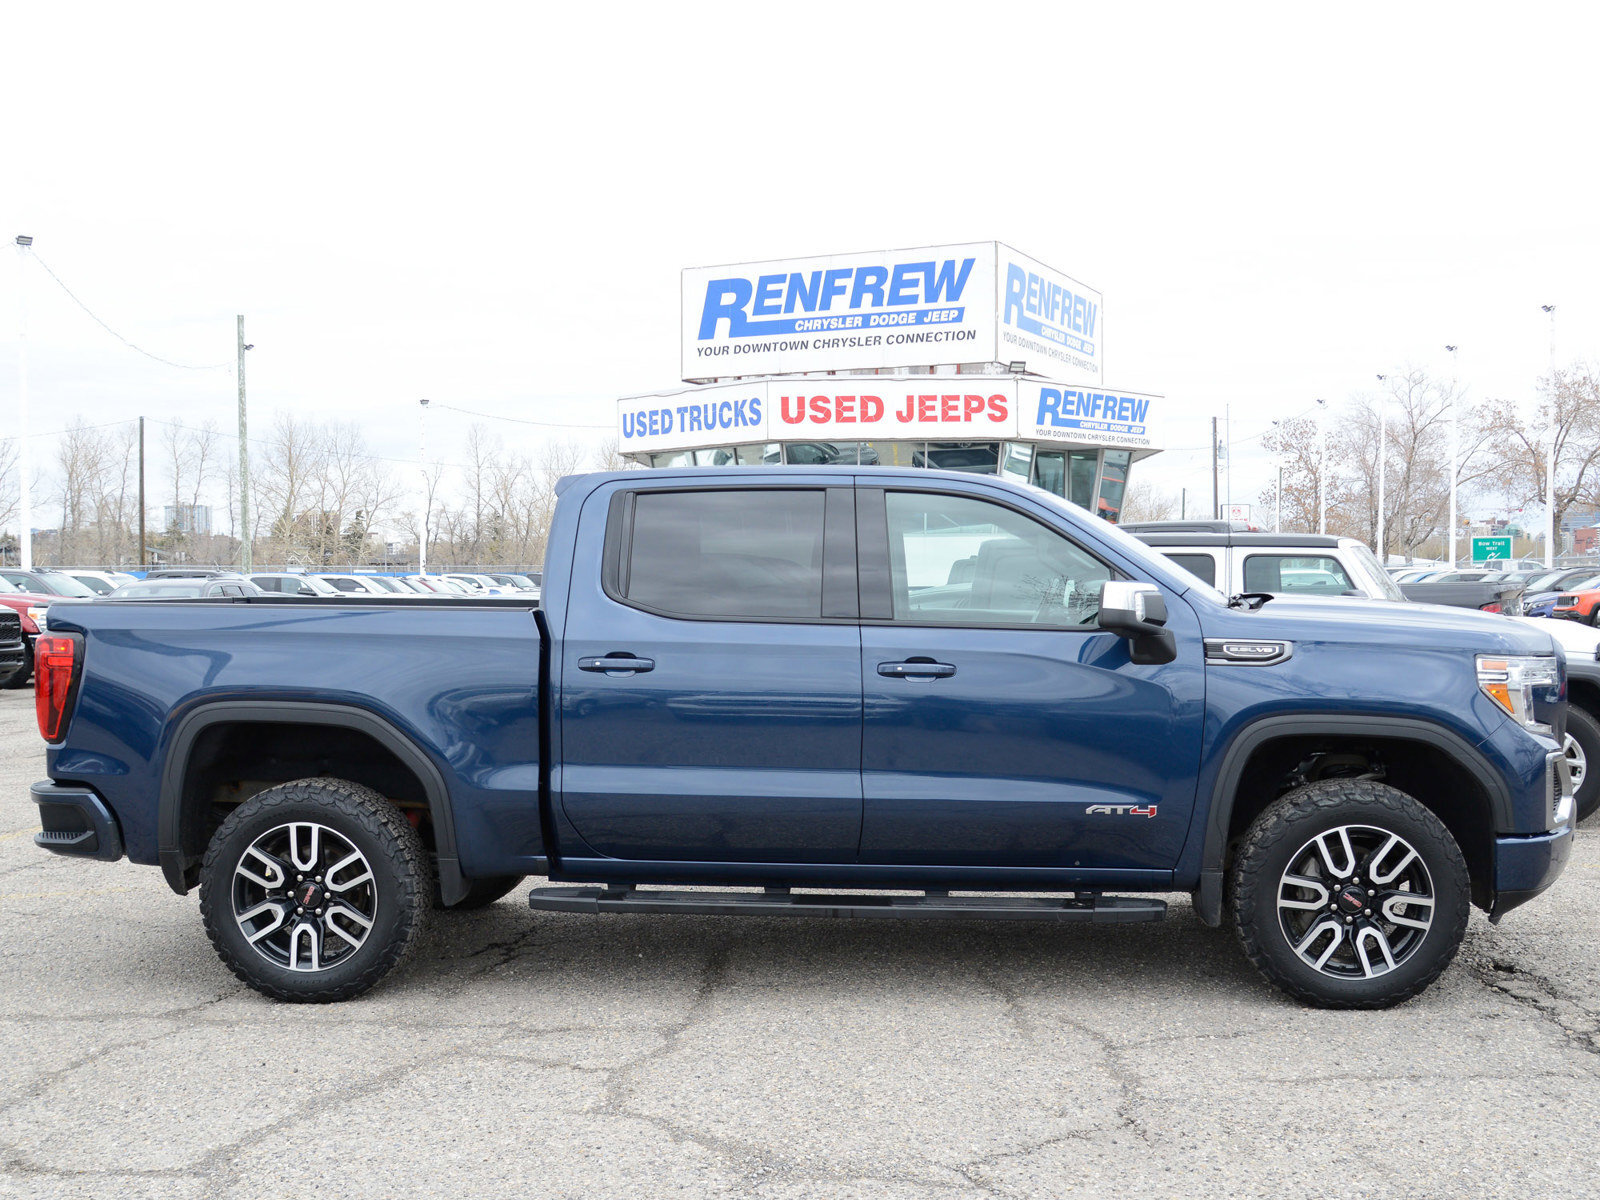 2019 GMC Sierra 1500 AT4 Crew Cab 4x4, Sunroof, Heated/Cooled Leather